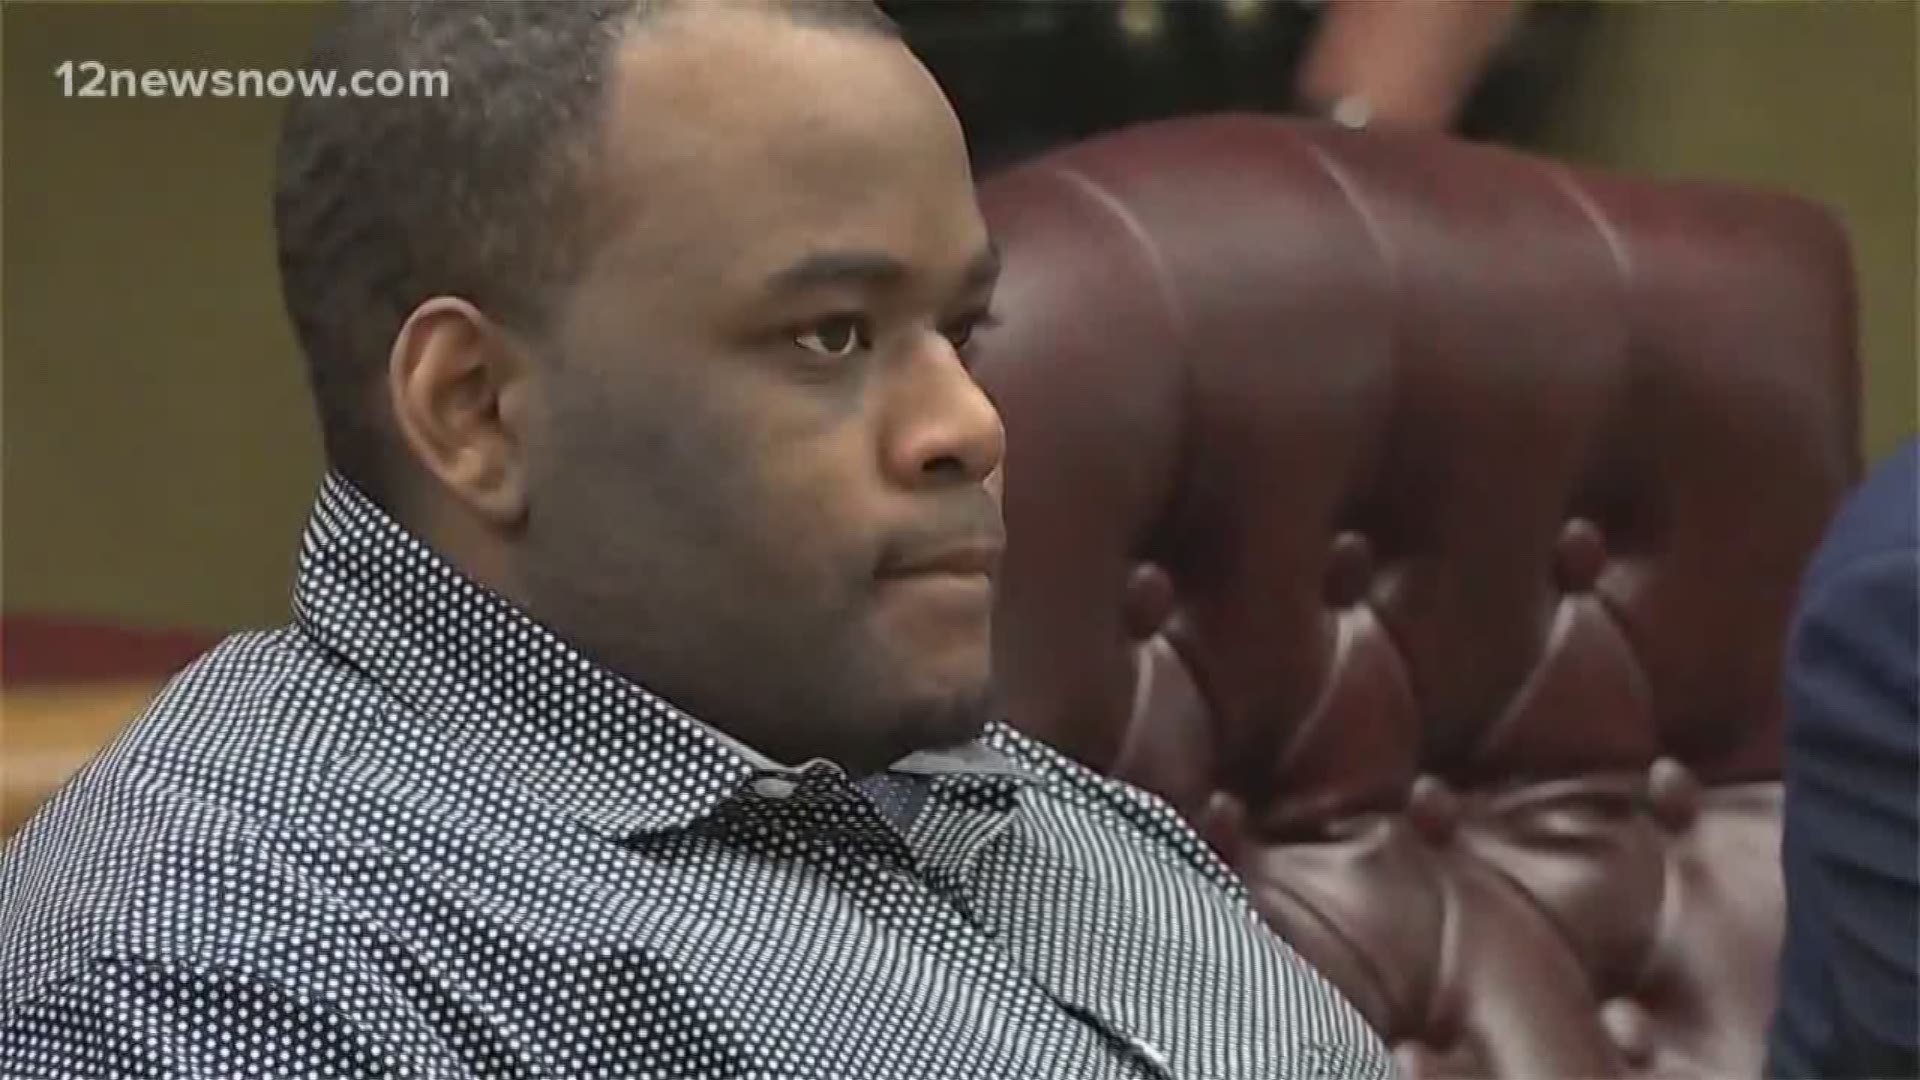 Brandon Coleman was found not guilty on Thursday, June 20.